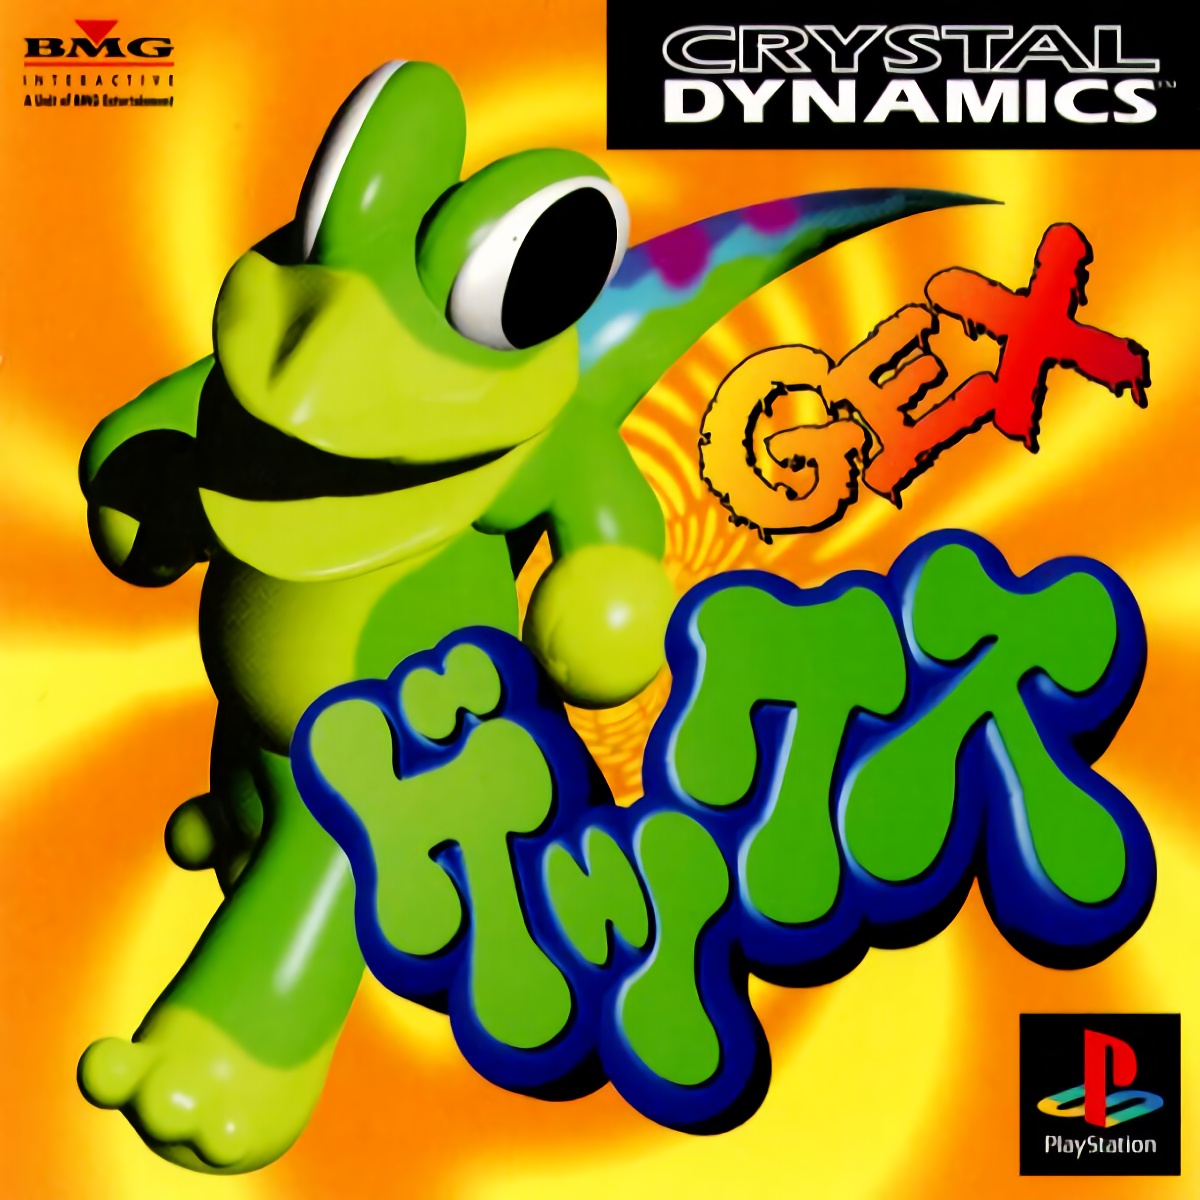 1 jap. GEX ps1 обложка. GEX Sony PLAYSTATION 1. GEX ps1 диск. Ps1 GEX 1995 русская версия.